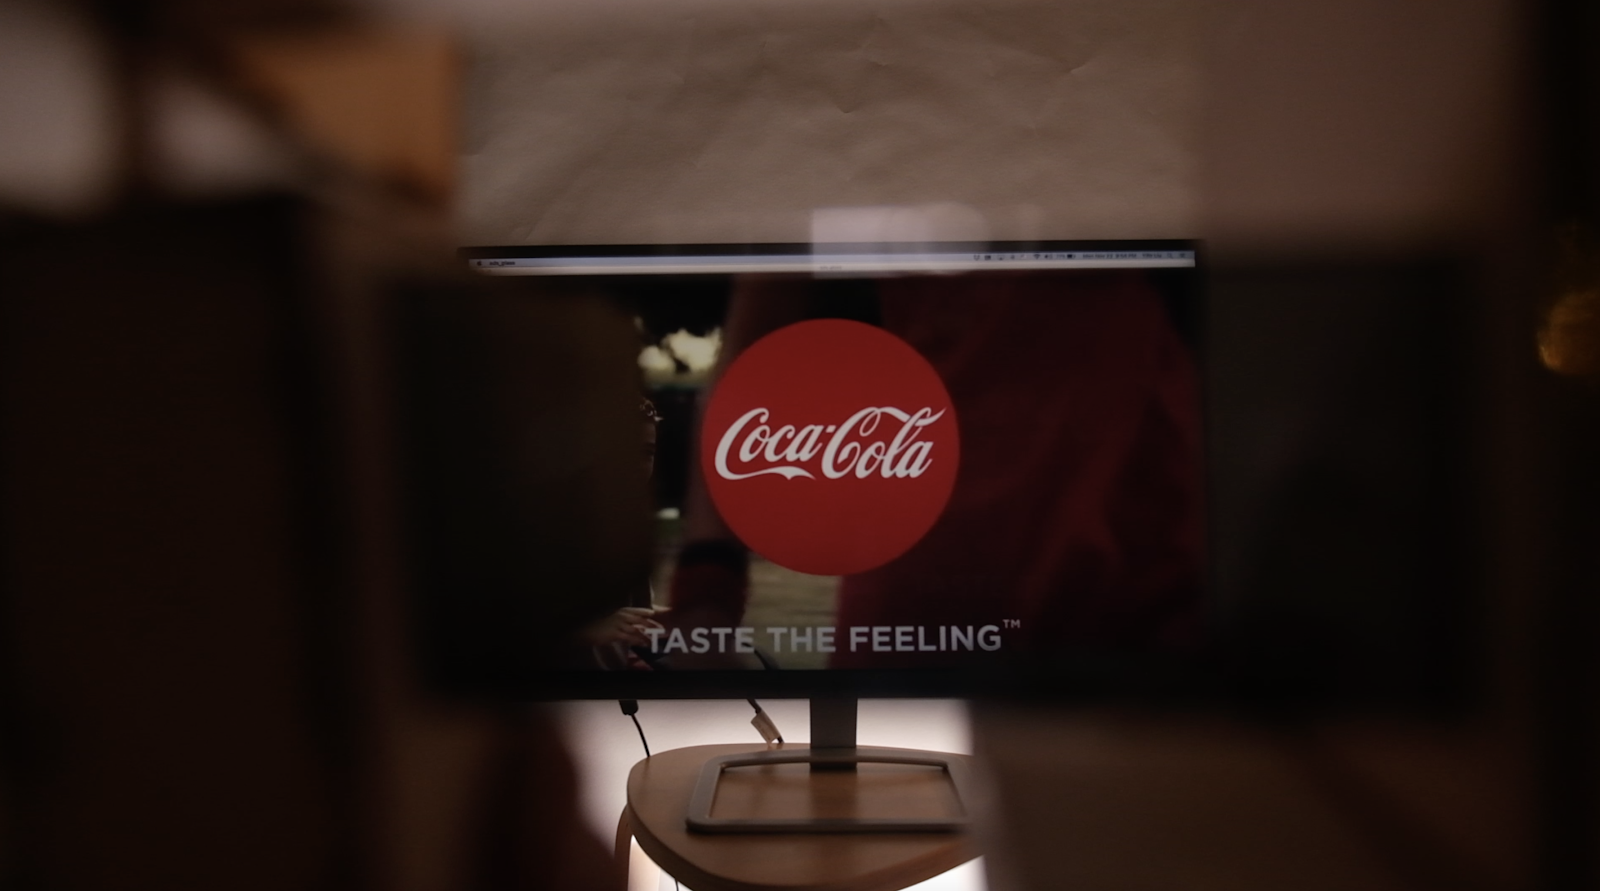 Image of advertisement through the shutter glass 